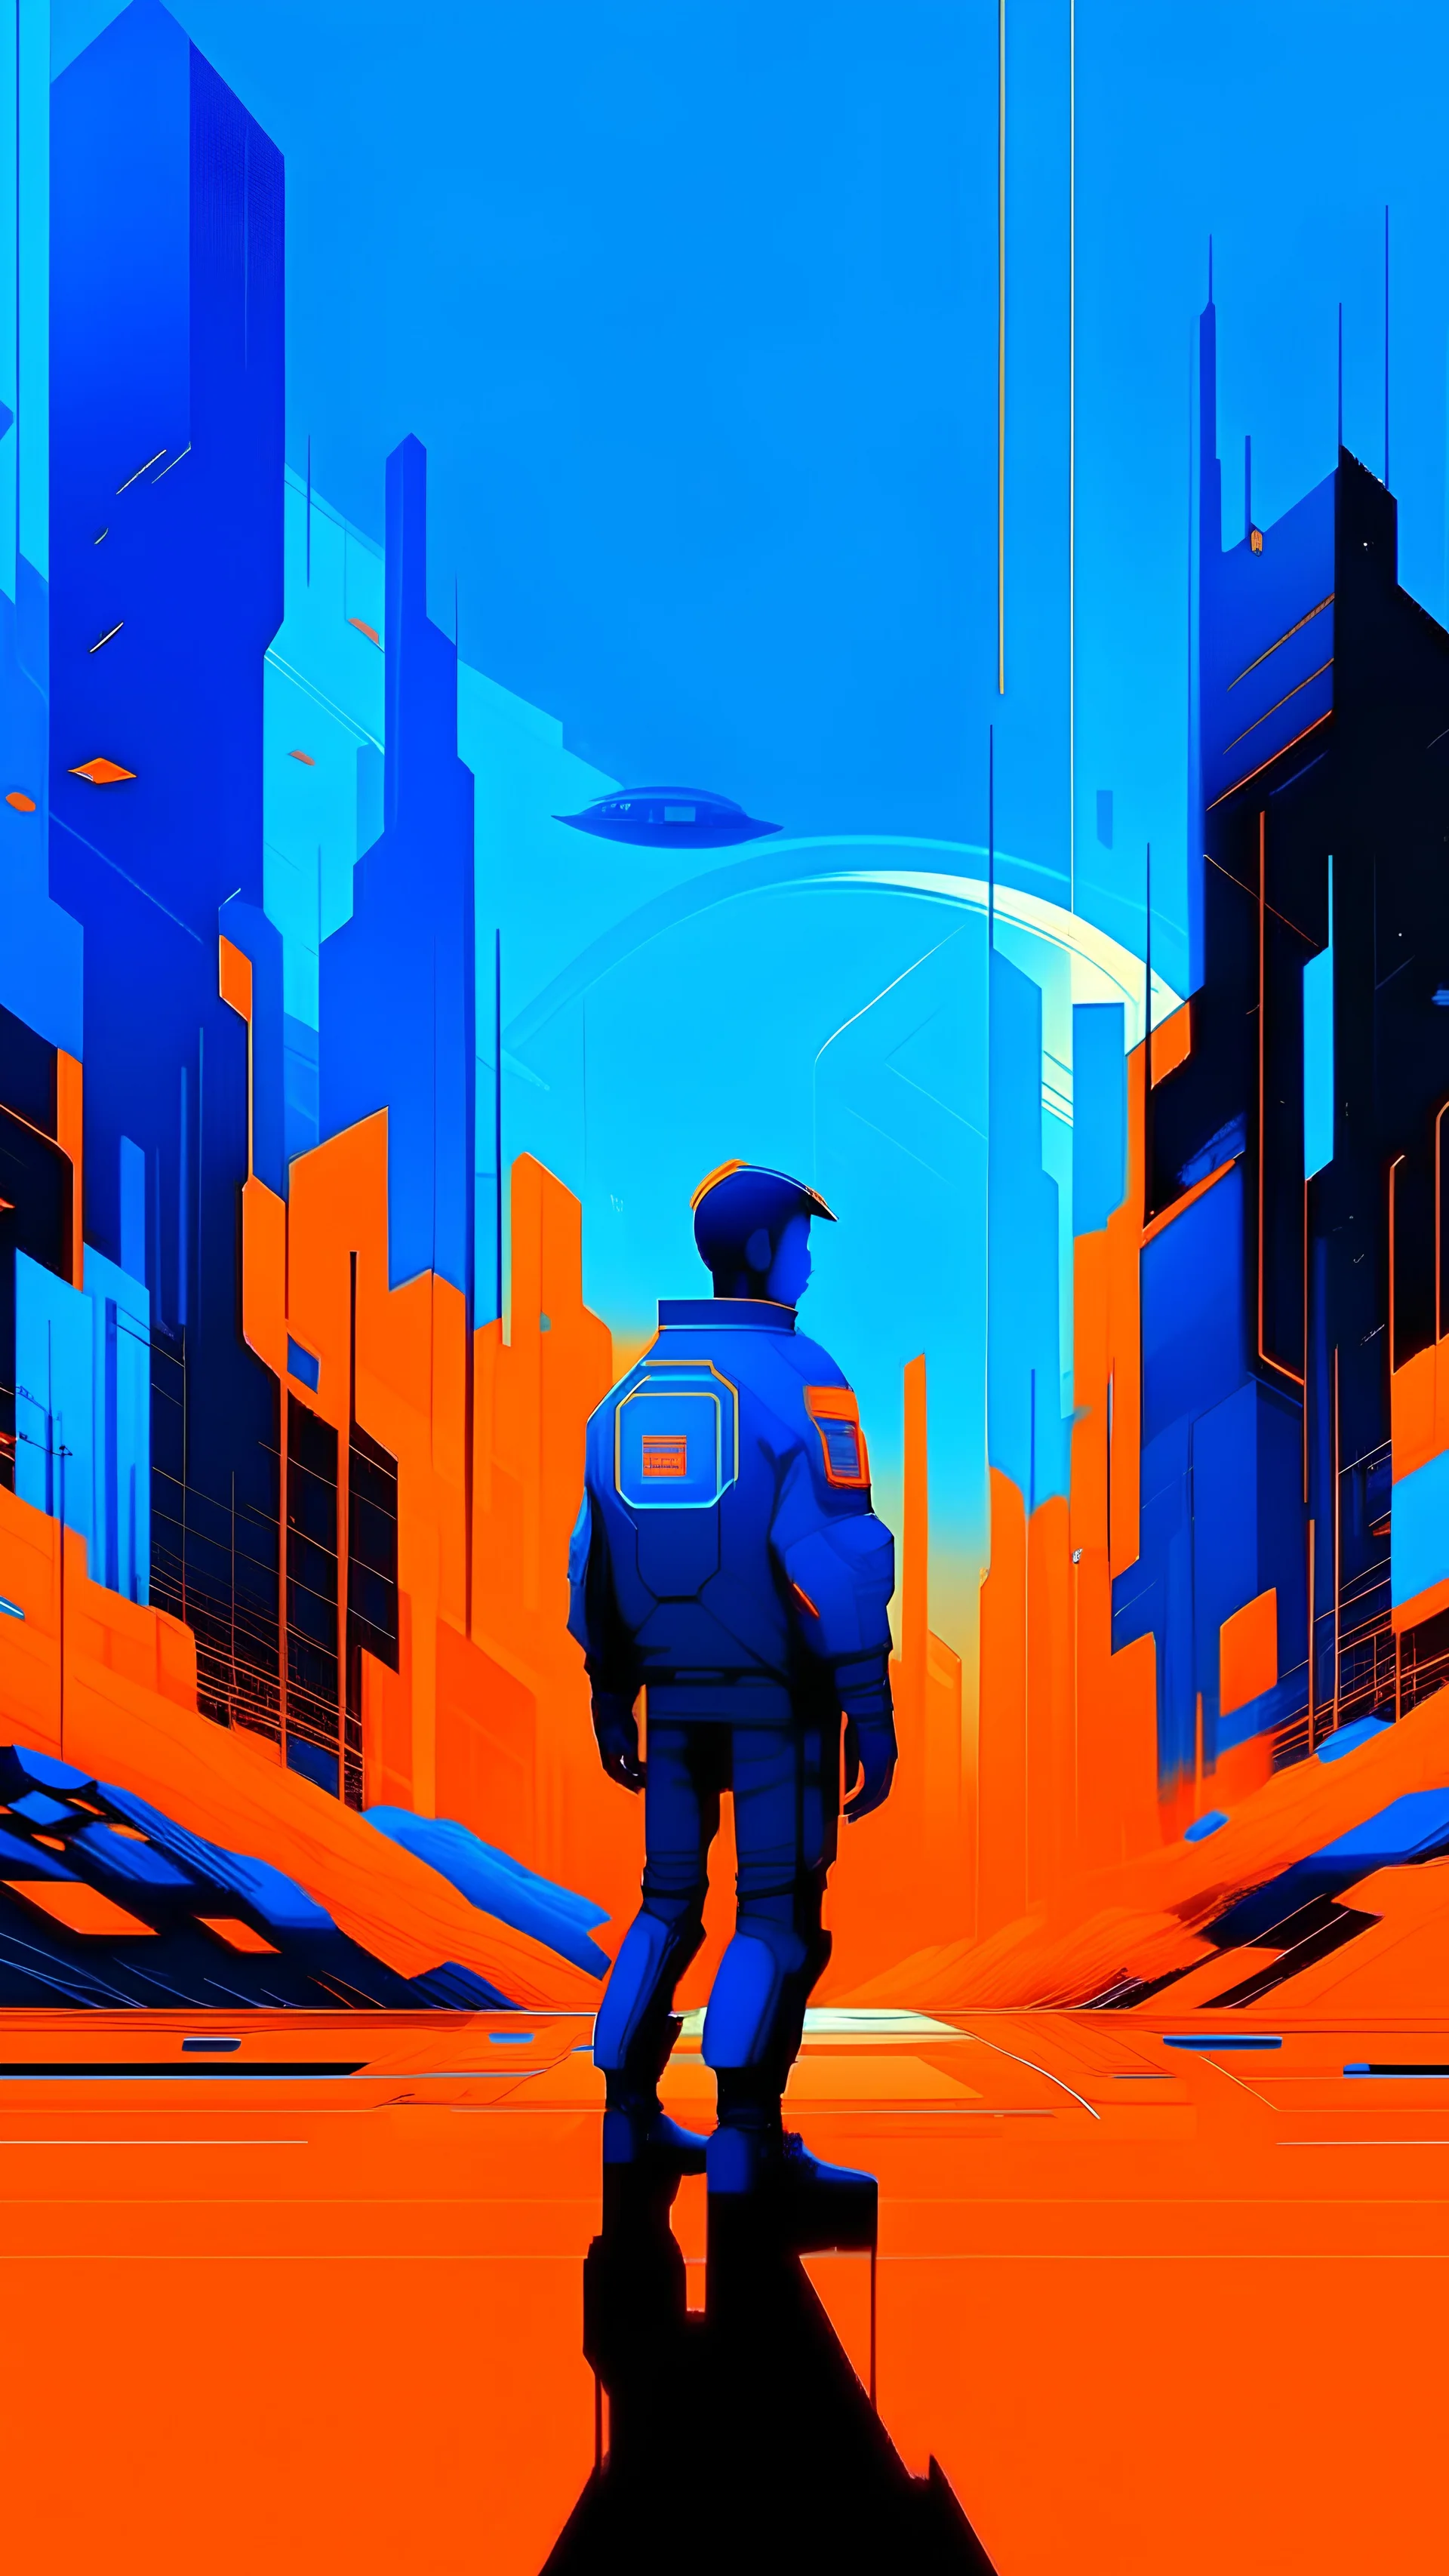 Futuristic and minimalist cyberpunk illustration by Miyazaki of a man surround by a digital landscape. Colors are blue and orange.